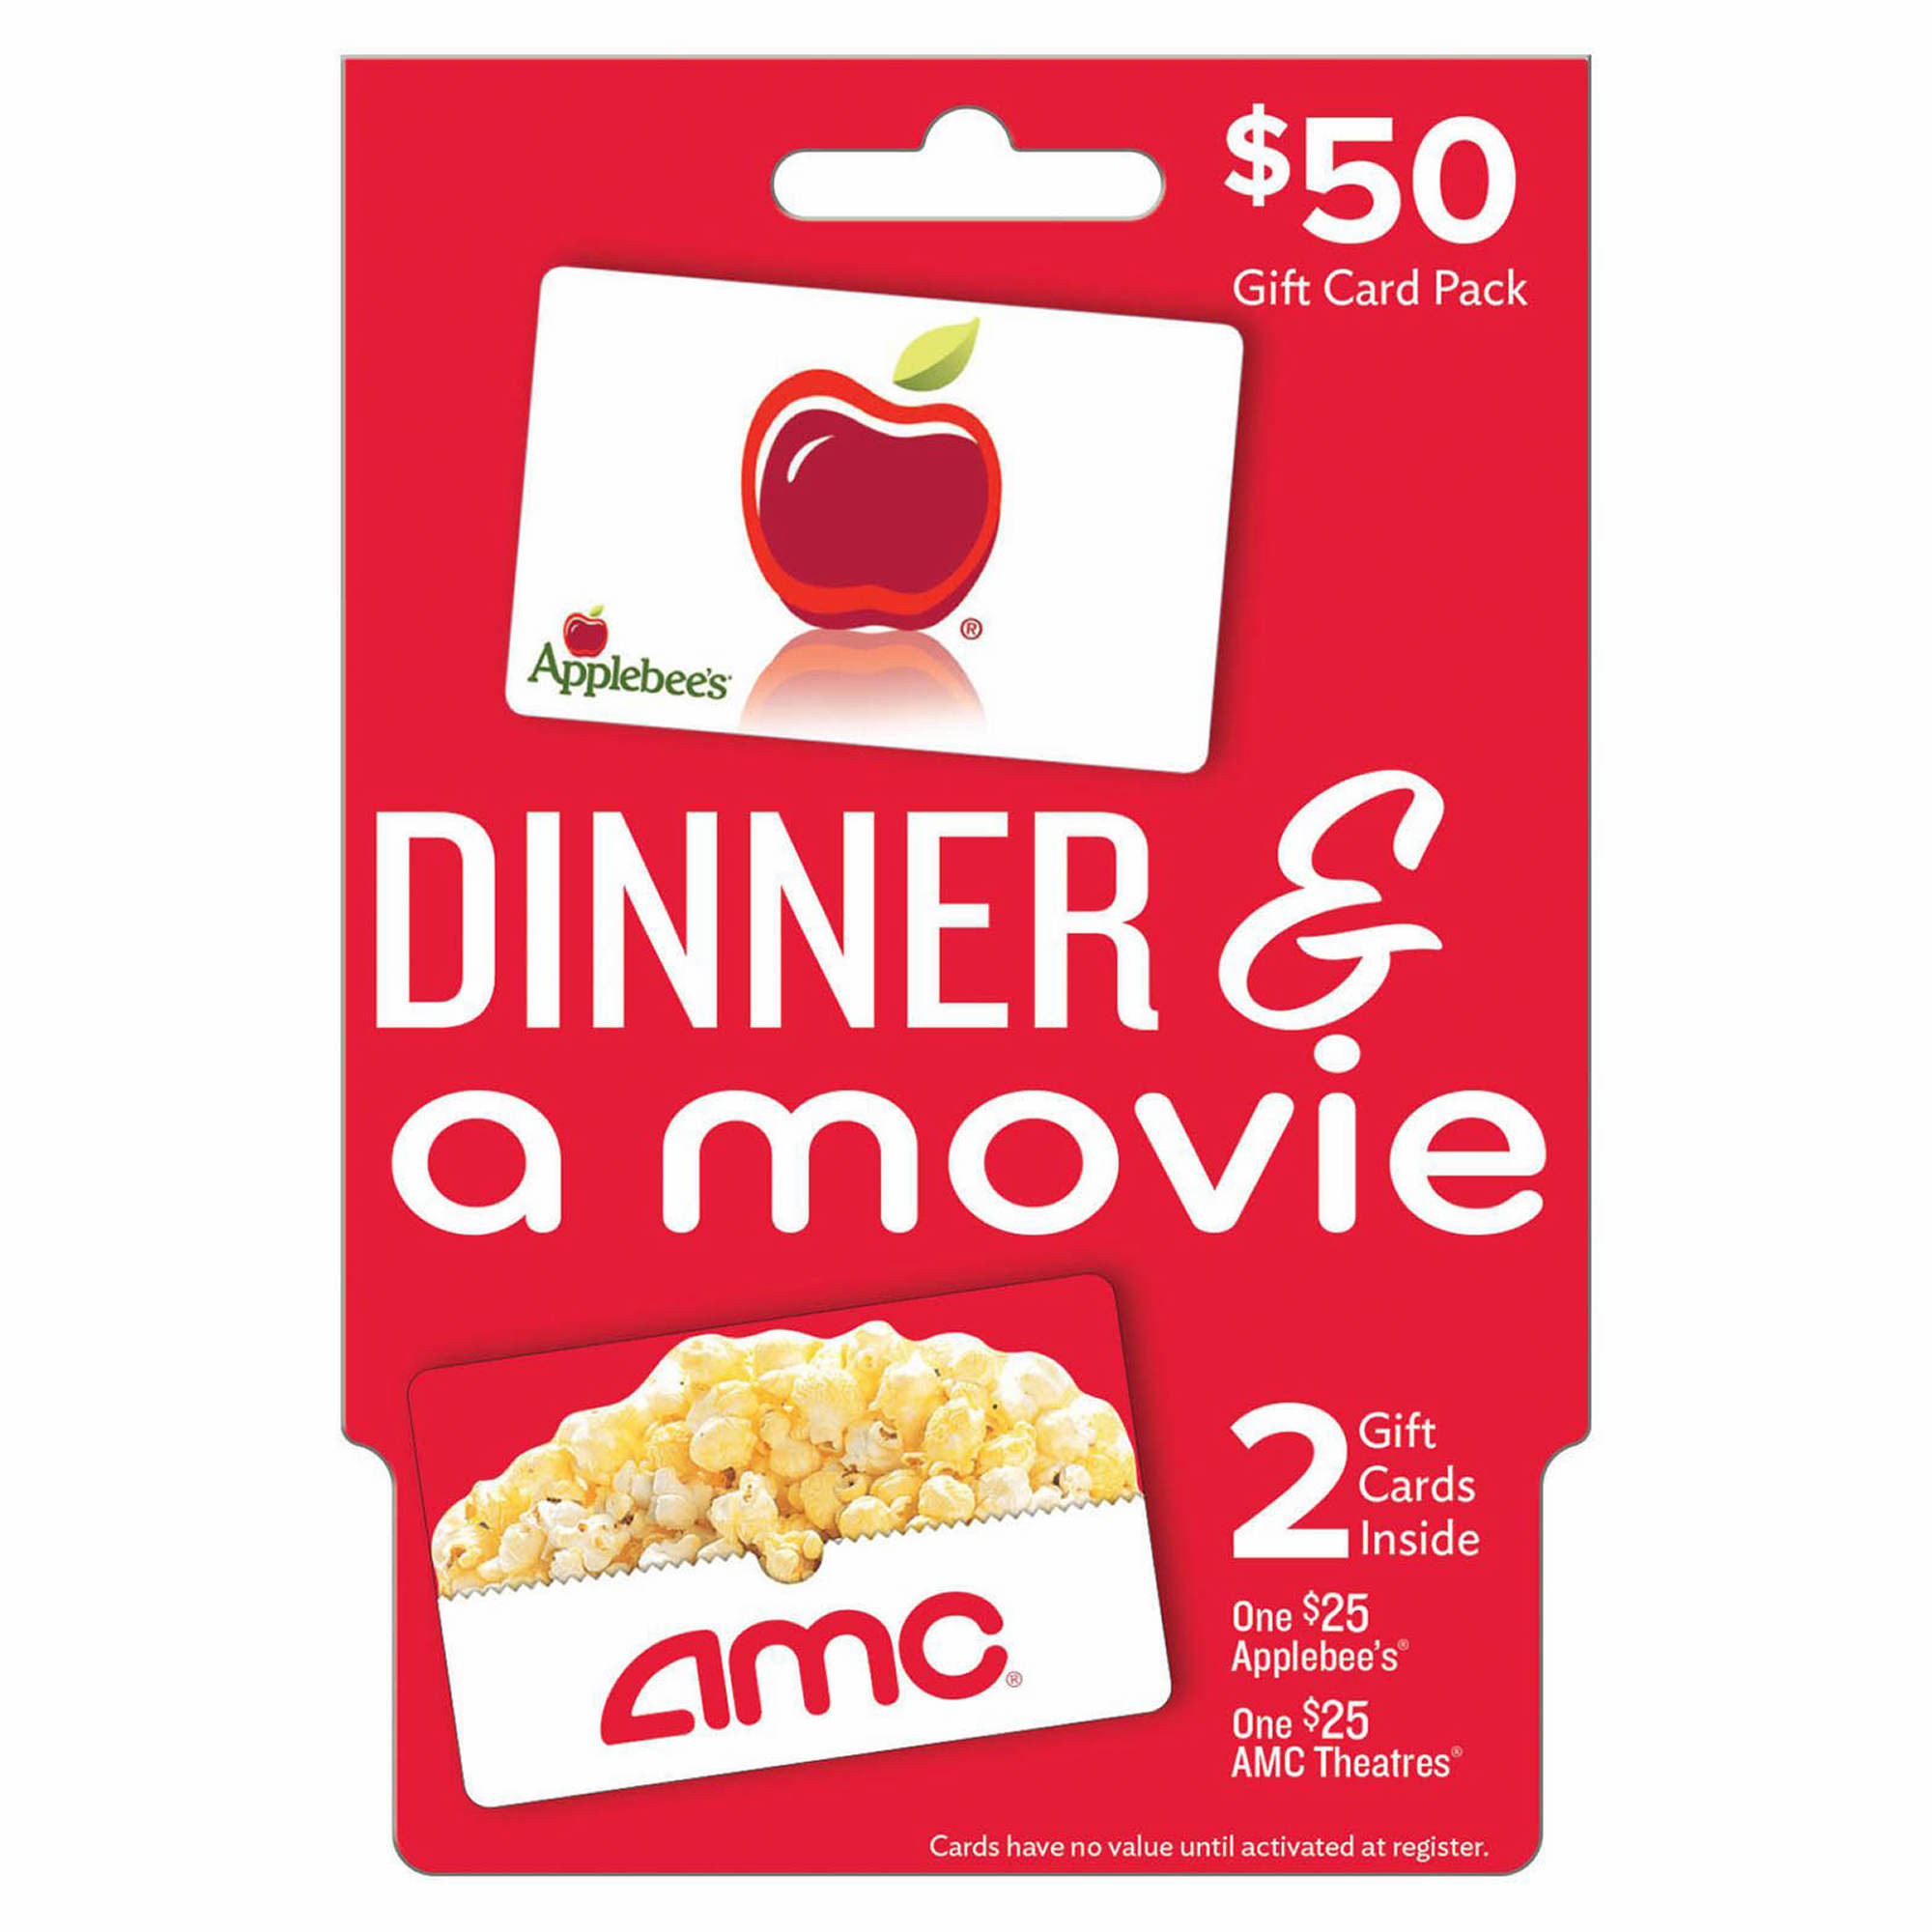 Dinner And Movie Gift Card
 $50 Dinner and a Movie Gift Card Pack BJ s Wholesale Club